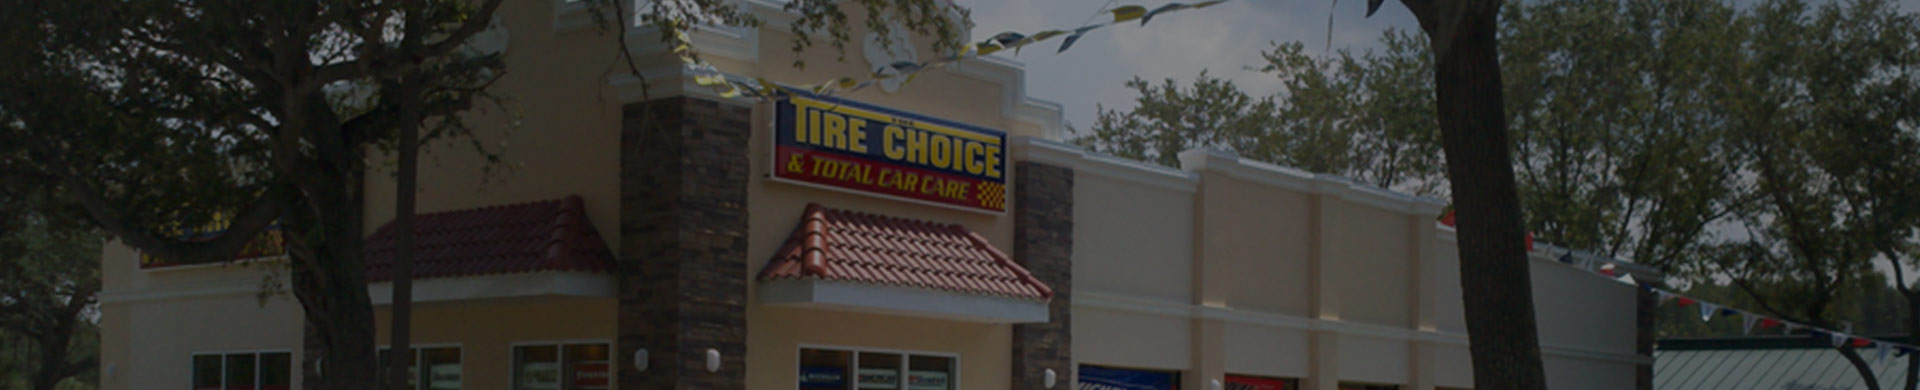 Tire Choice storefront background